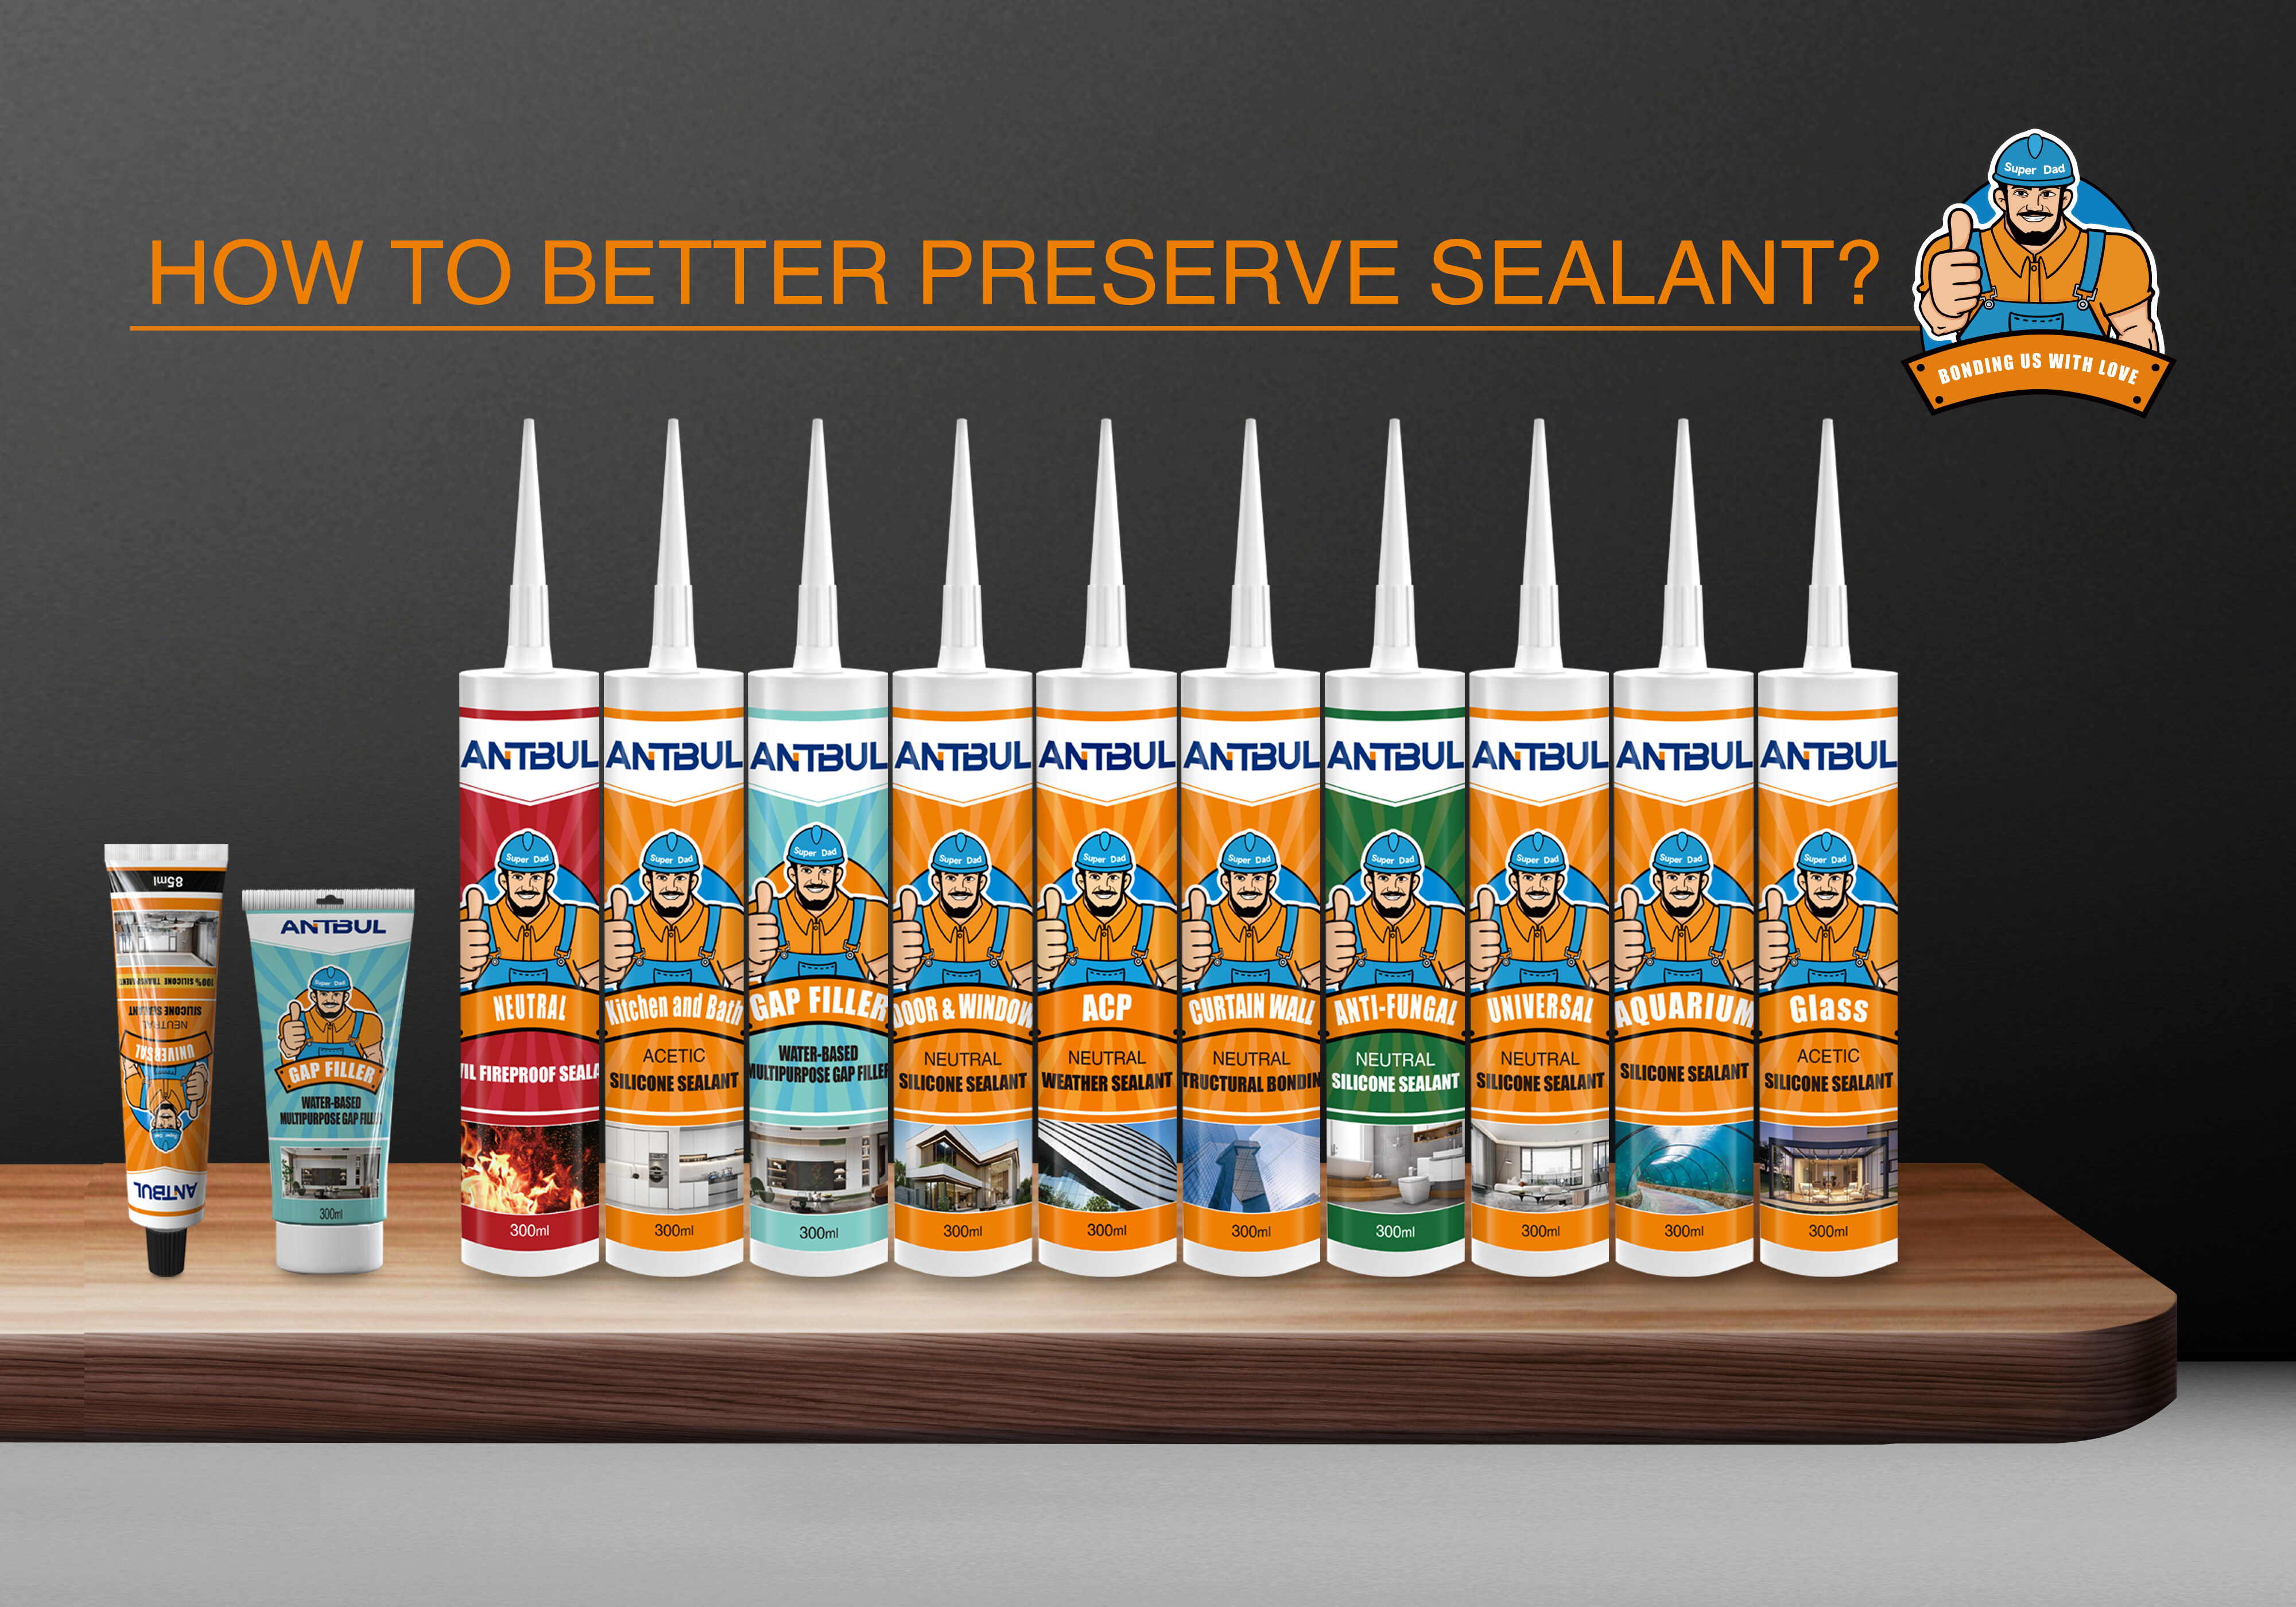 How to better preserve sealant.